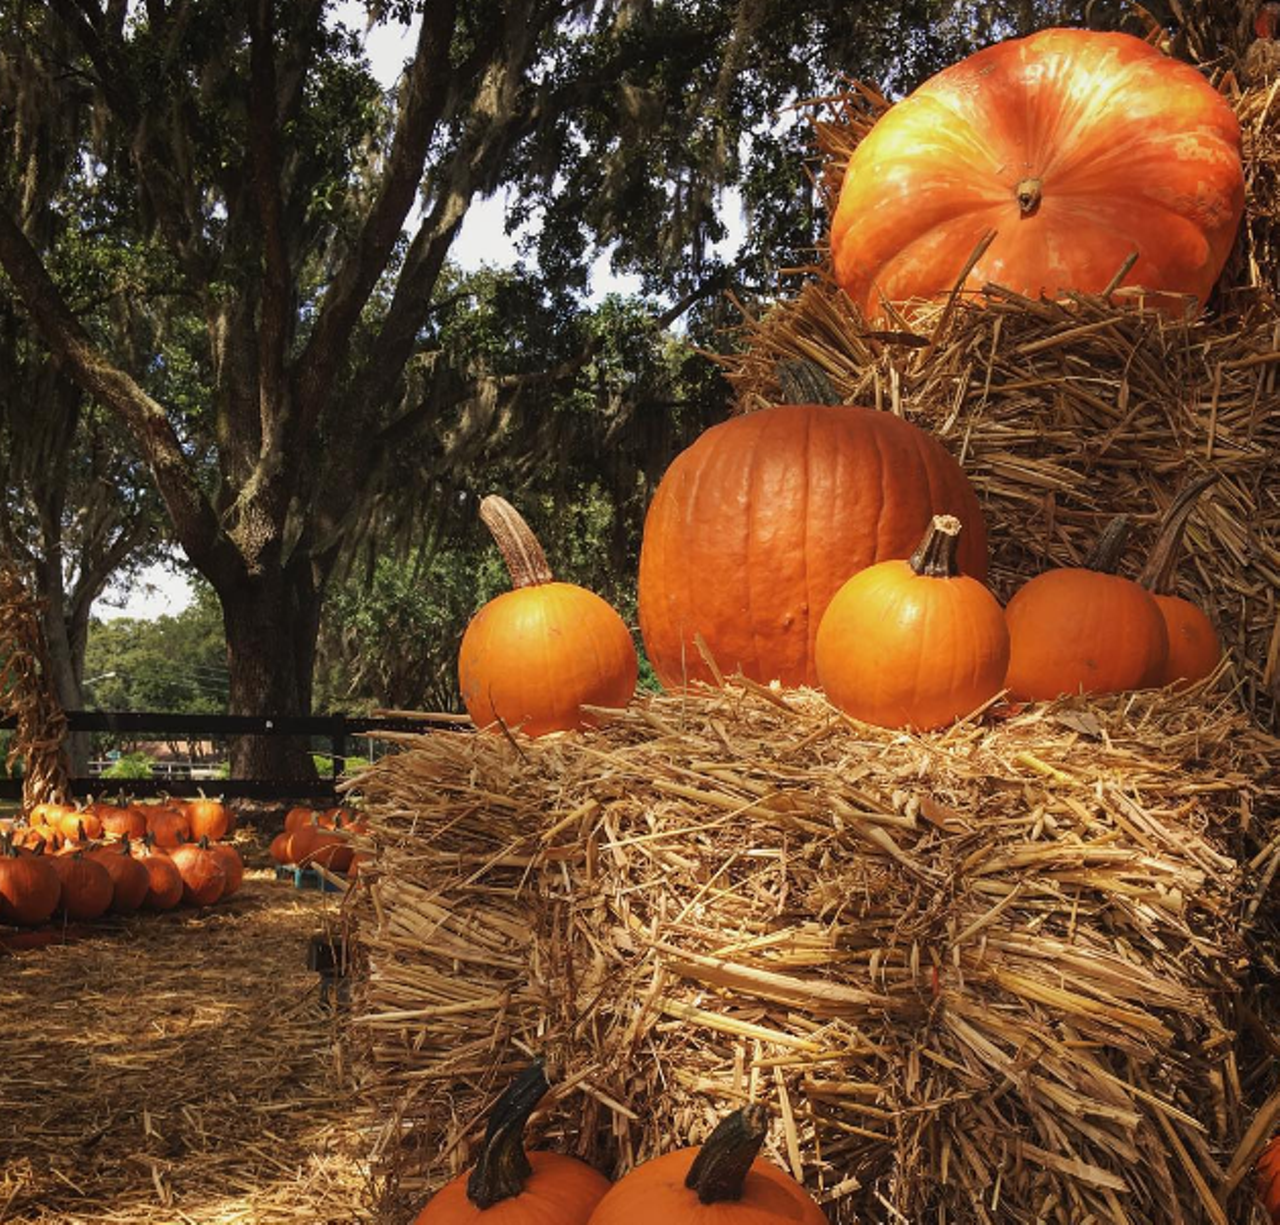 Club Lake Plantation
3403 Rock Springs Road, Apopka | 407-703-2707
This multipurpose venue is big on promoting agritourism. You can visit the farm where they host fall festivals, weddings and all sorts of outdoor events, where you can pick out a pumpkin from the patch or visit the country store for something with a shelf-life.
Photo via delmis.c/Instagram